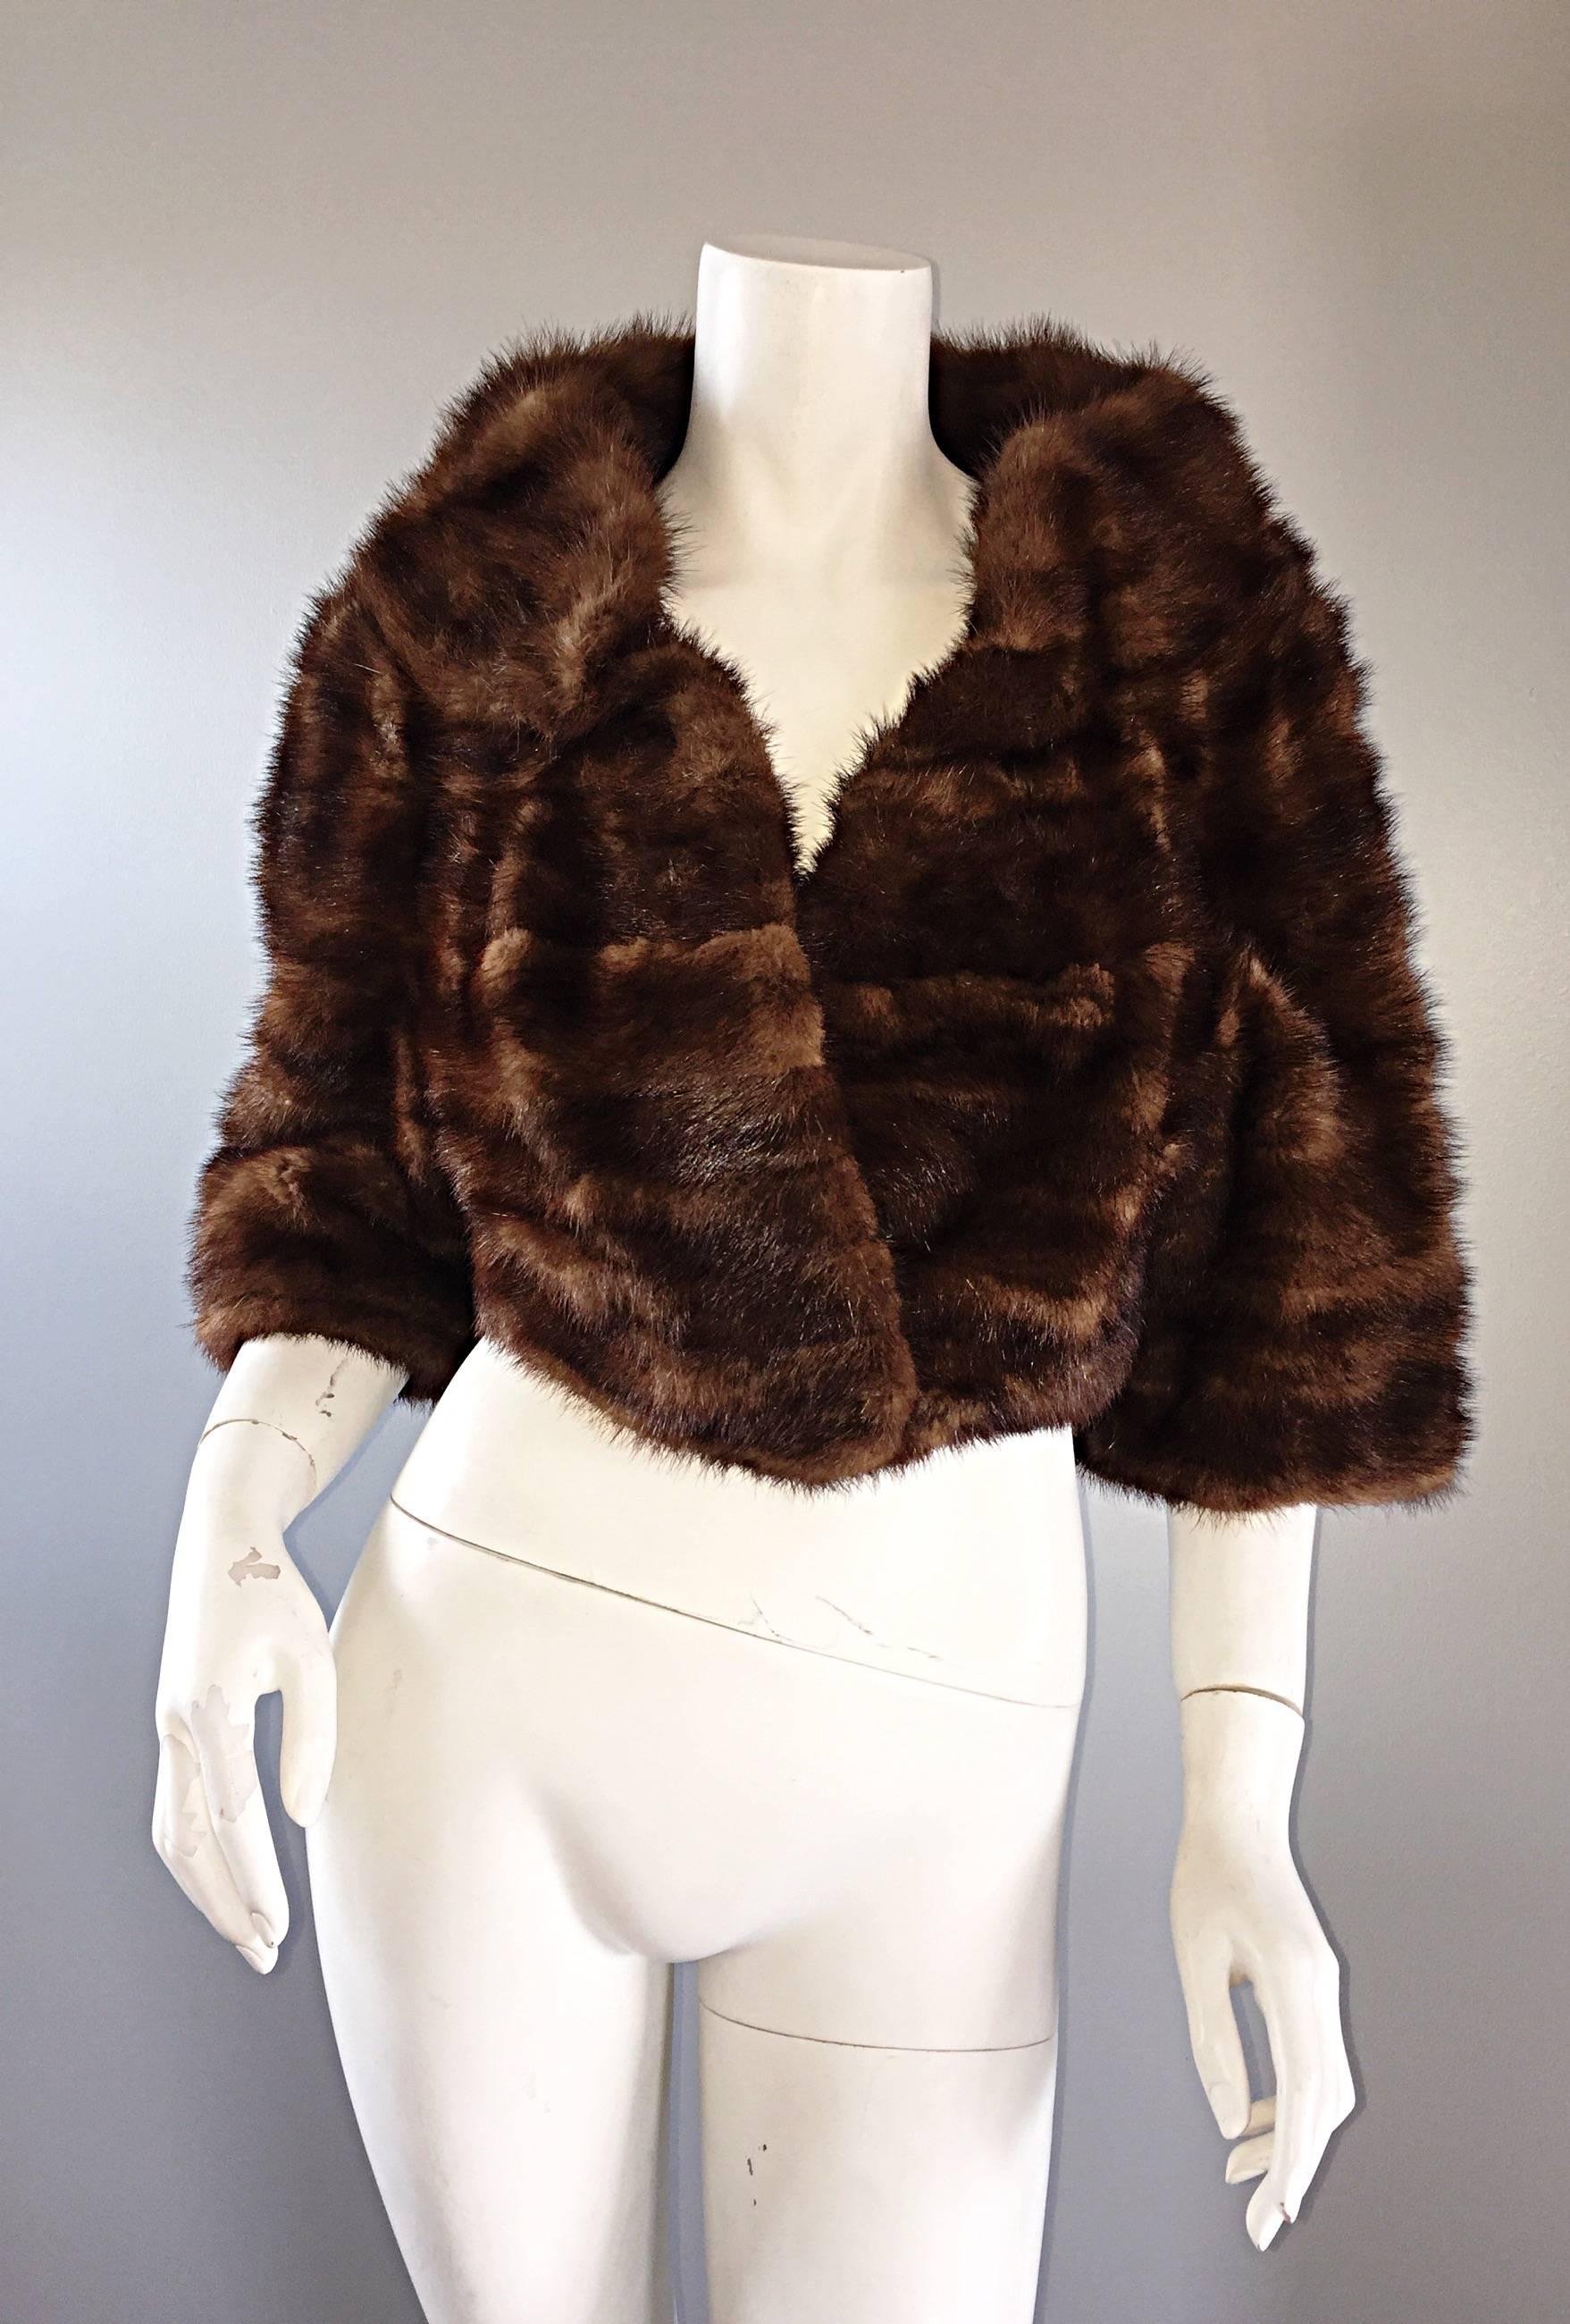 Luxurious 1950 J. CUZZOLINO brown cropped mink chubby! Chic 3/4 sleeves with a feminine collar. Features the finest female mink pelts that are extremely soft, yet highly durable. Couture quality fur that is in excellent condition. Fur snap at waist